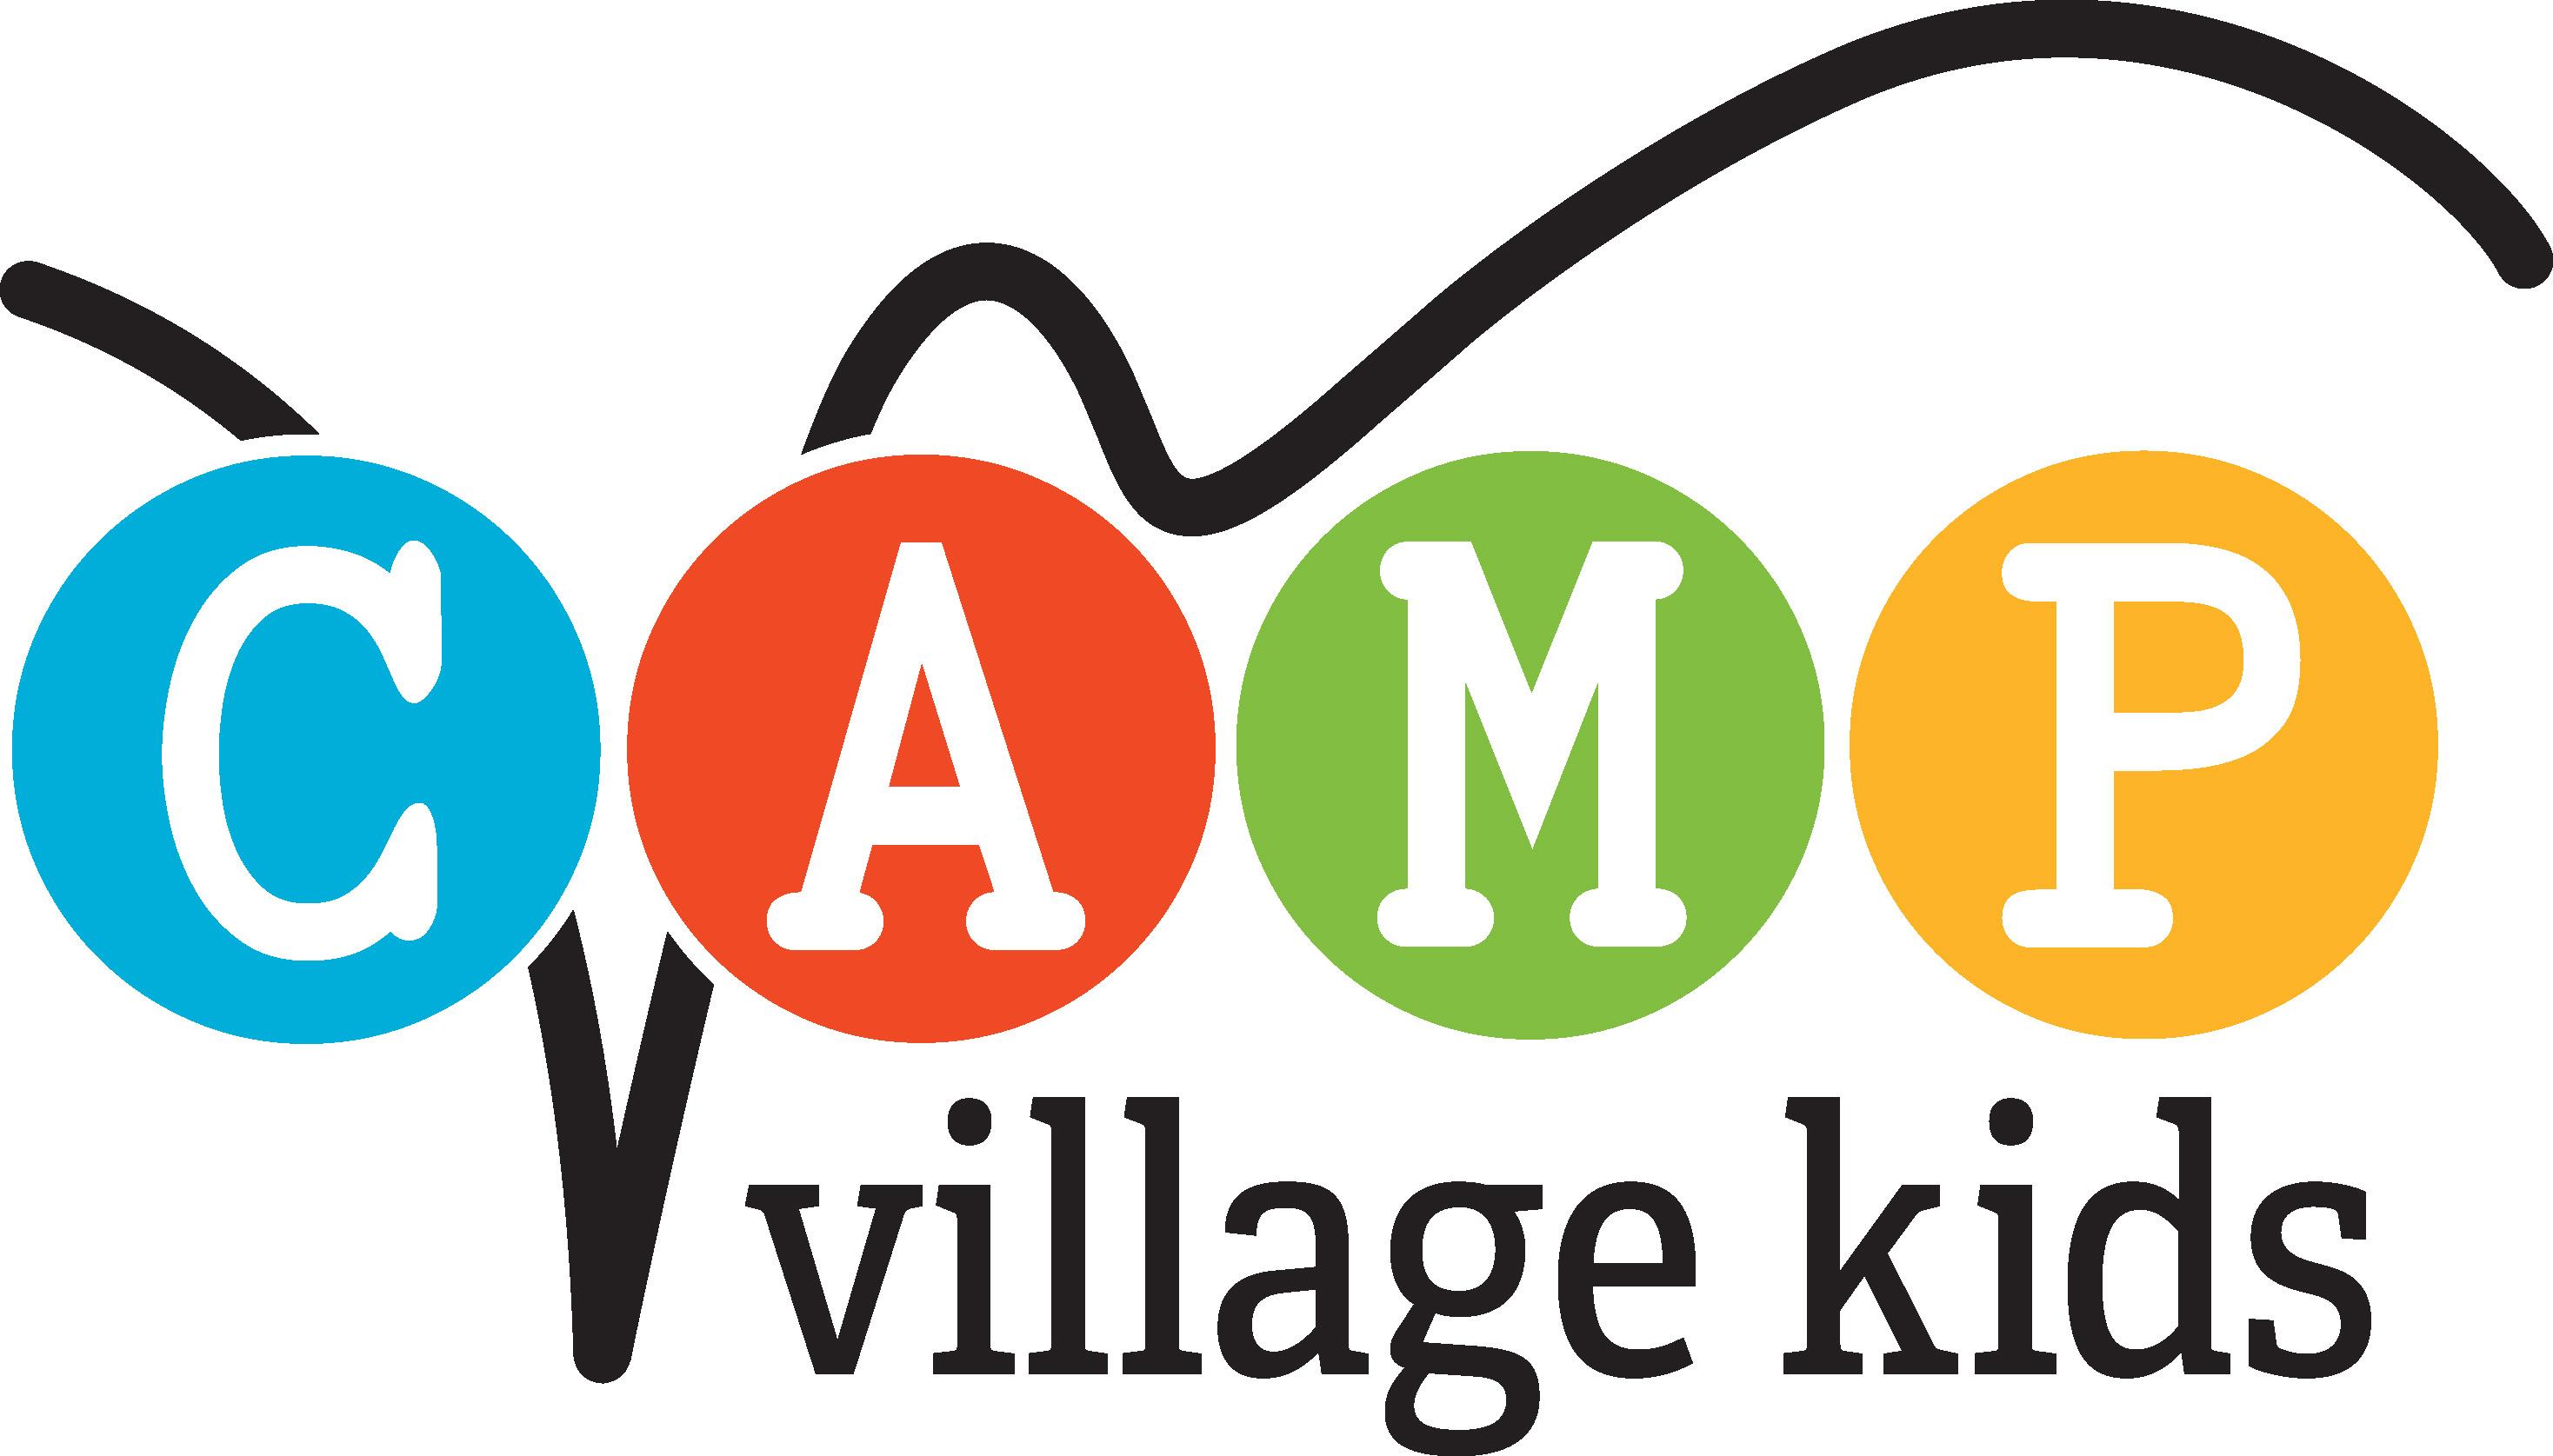 Youth Camp Logo - Village Kids - Village Clubs and Spas